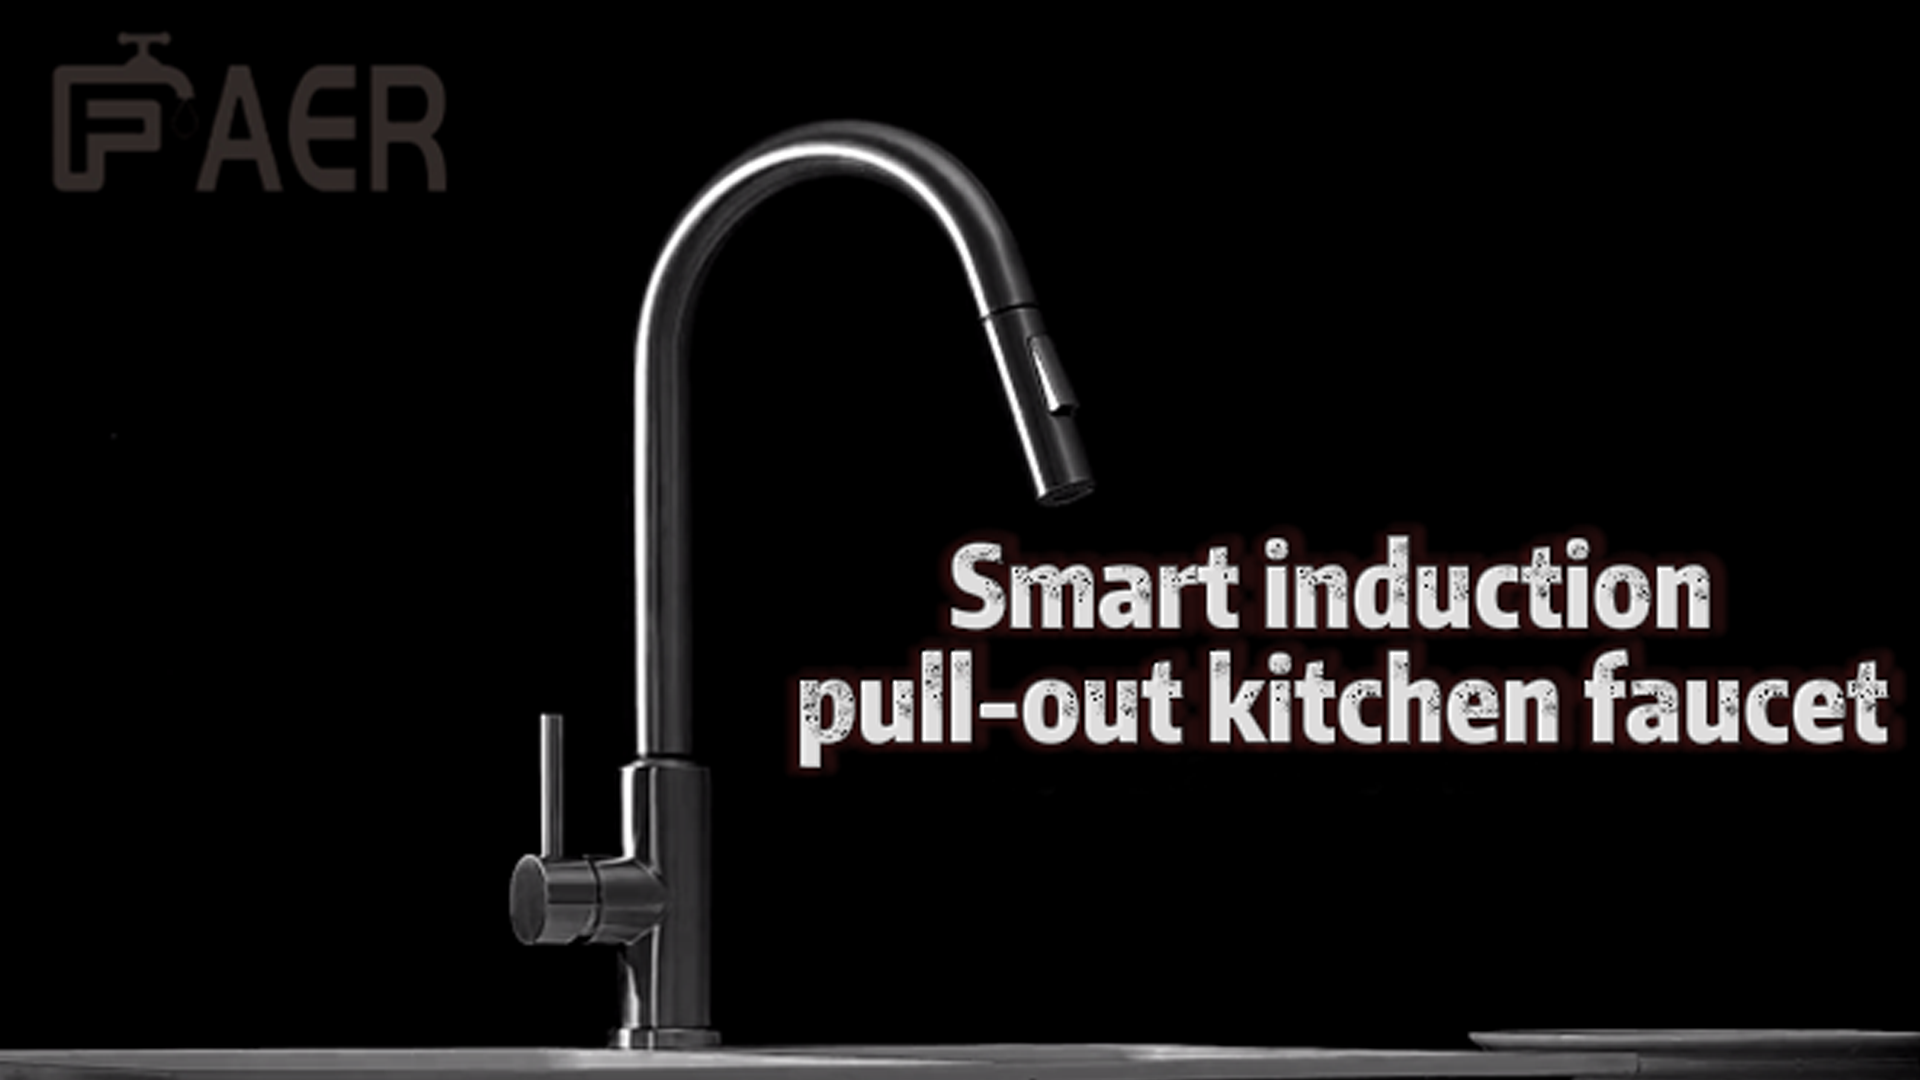 Smart induction pull-out kitchen faucet 2